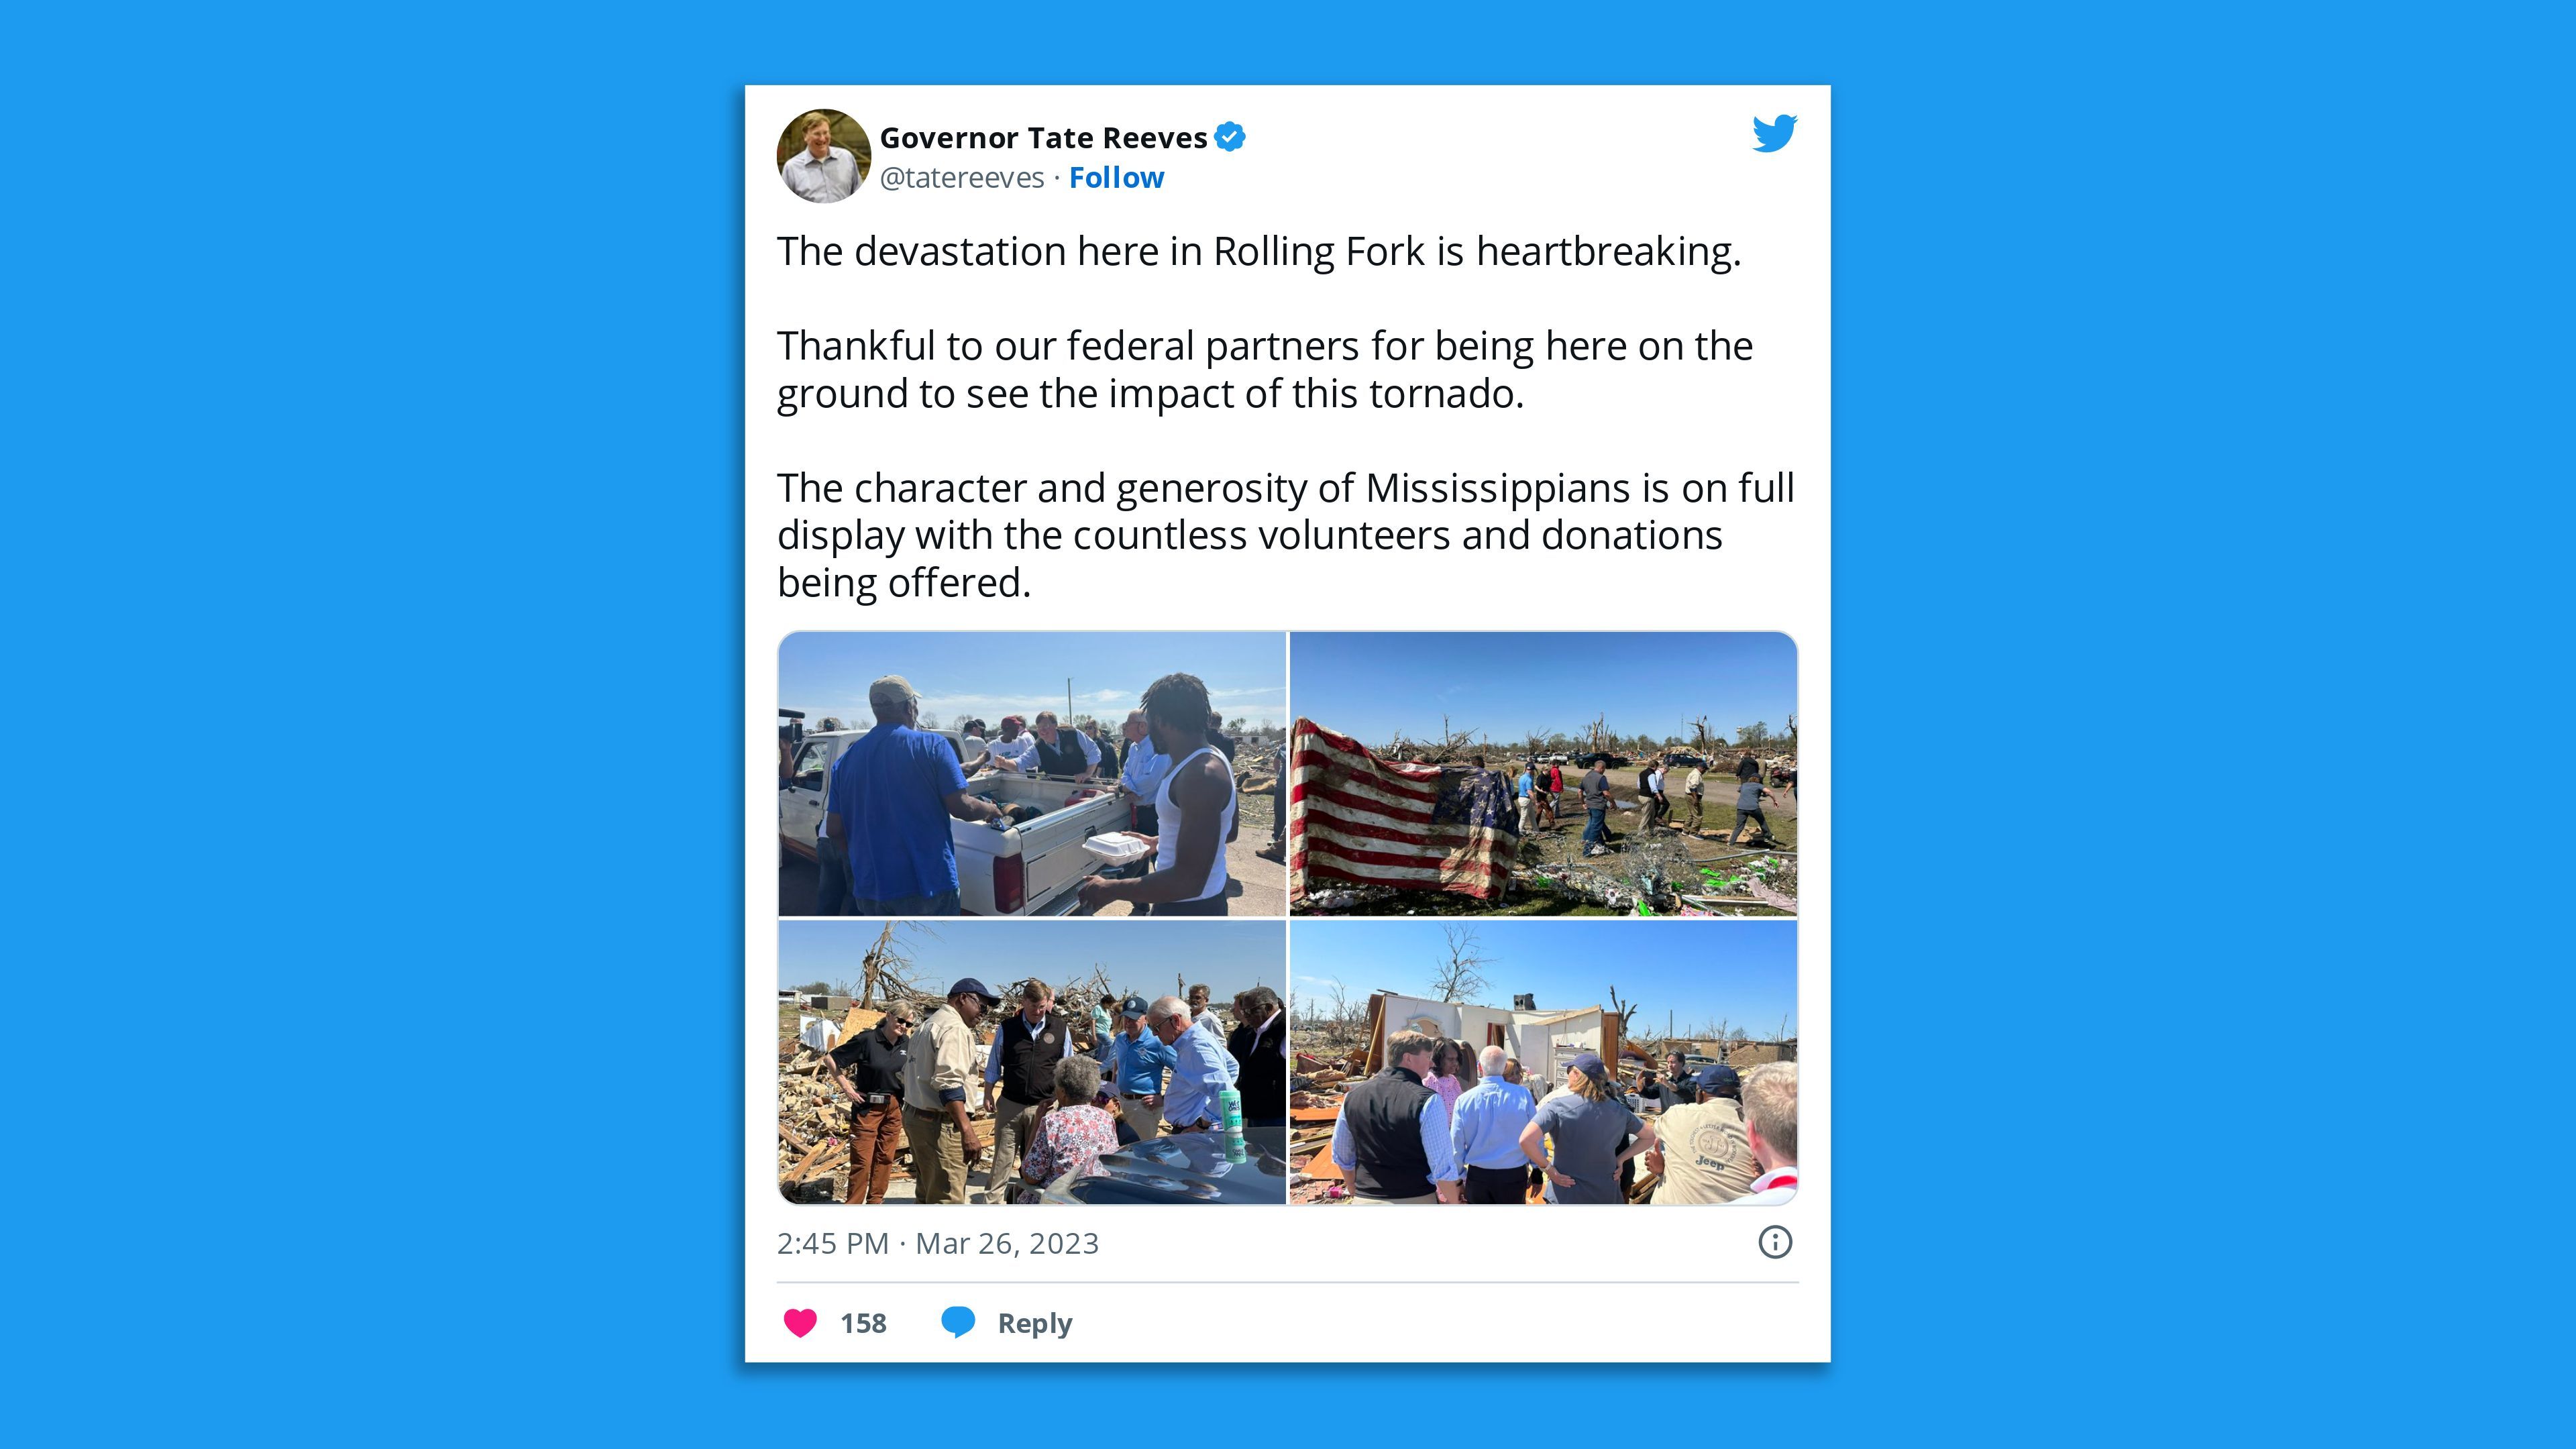 A screenshot of a Tweet by Mississippi Gov. Tate Reeves, stating "The devastation here in Rolling Fork is heartbreaking.  Thankful to our federal partners for being here on the ground to see the impact of this tornado.  The character and generosity of Mississippians is on full display with the countless volunteers and donations being offered."